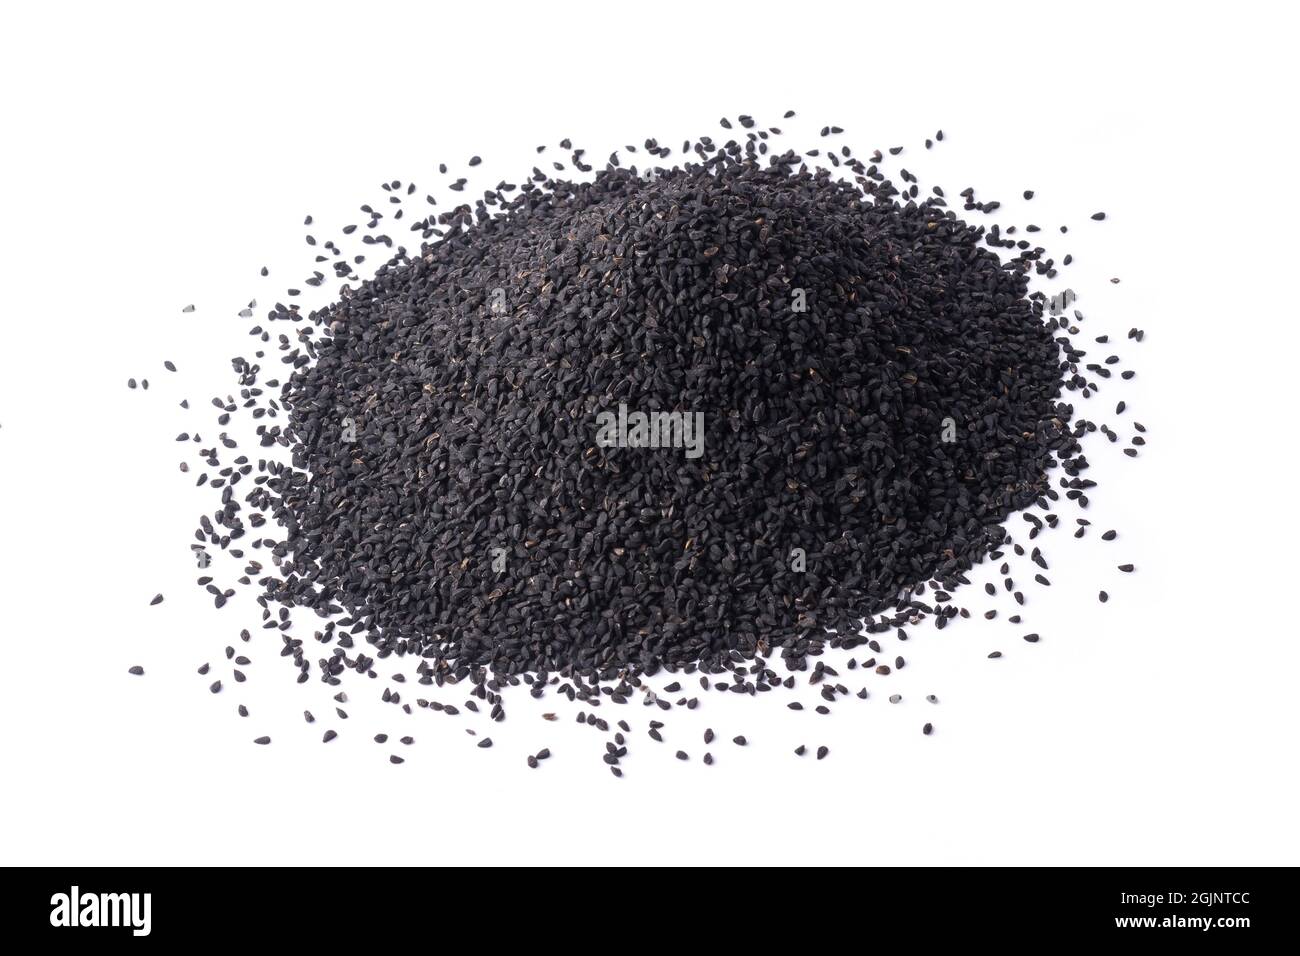 heap of black seeds, also known as black cumin or caraway or kalonji, isolated on white background, closeup Stock Photo